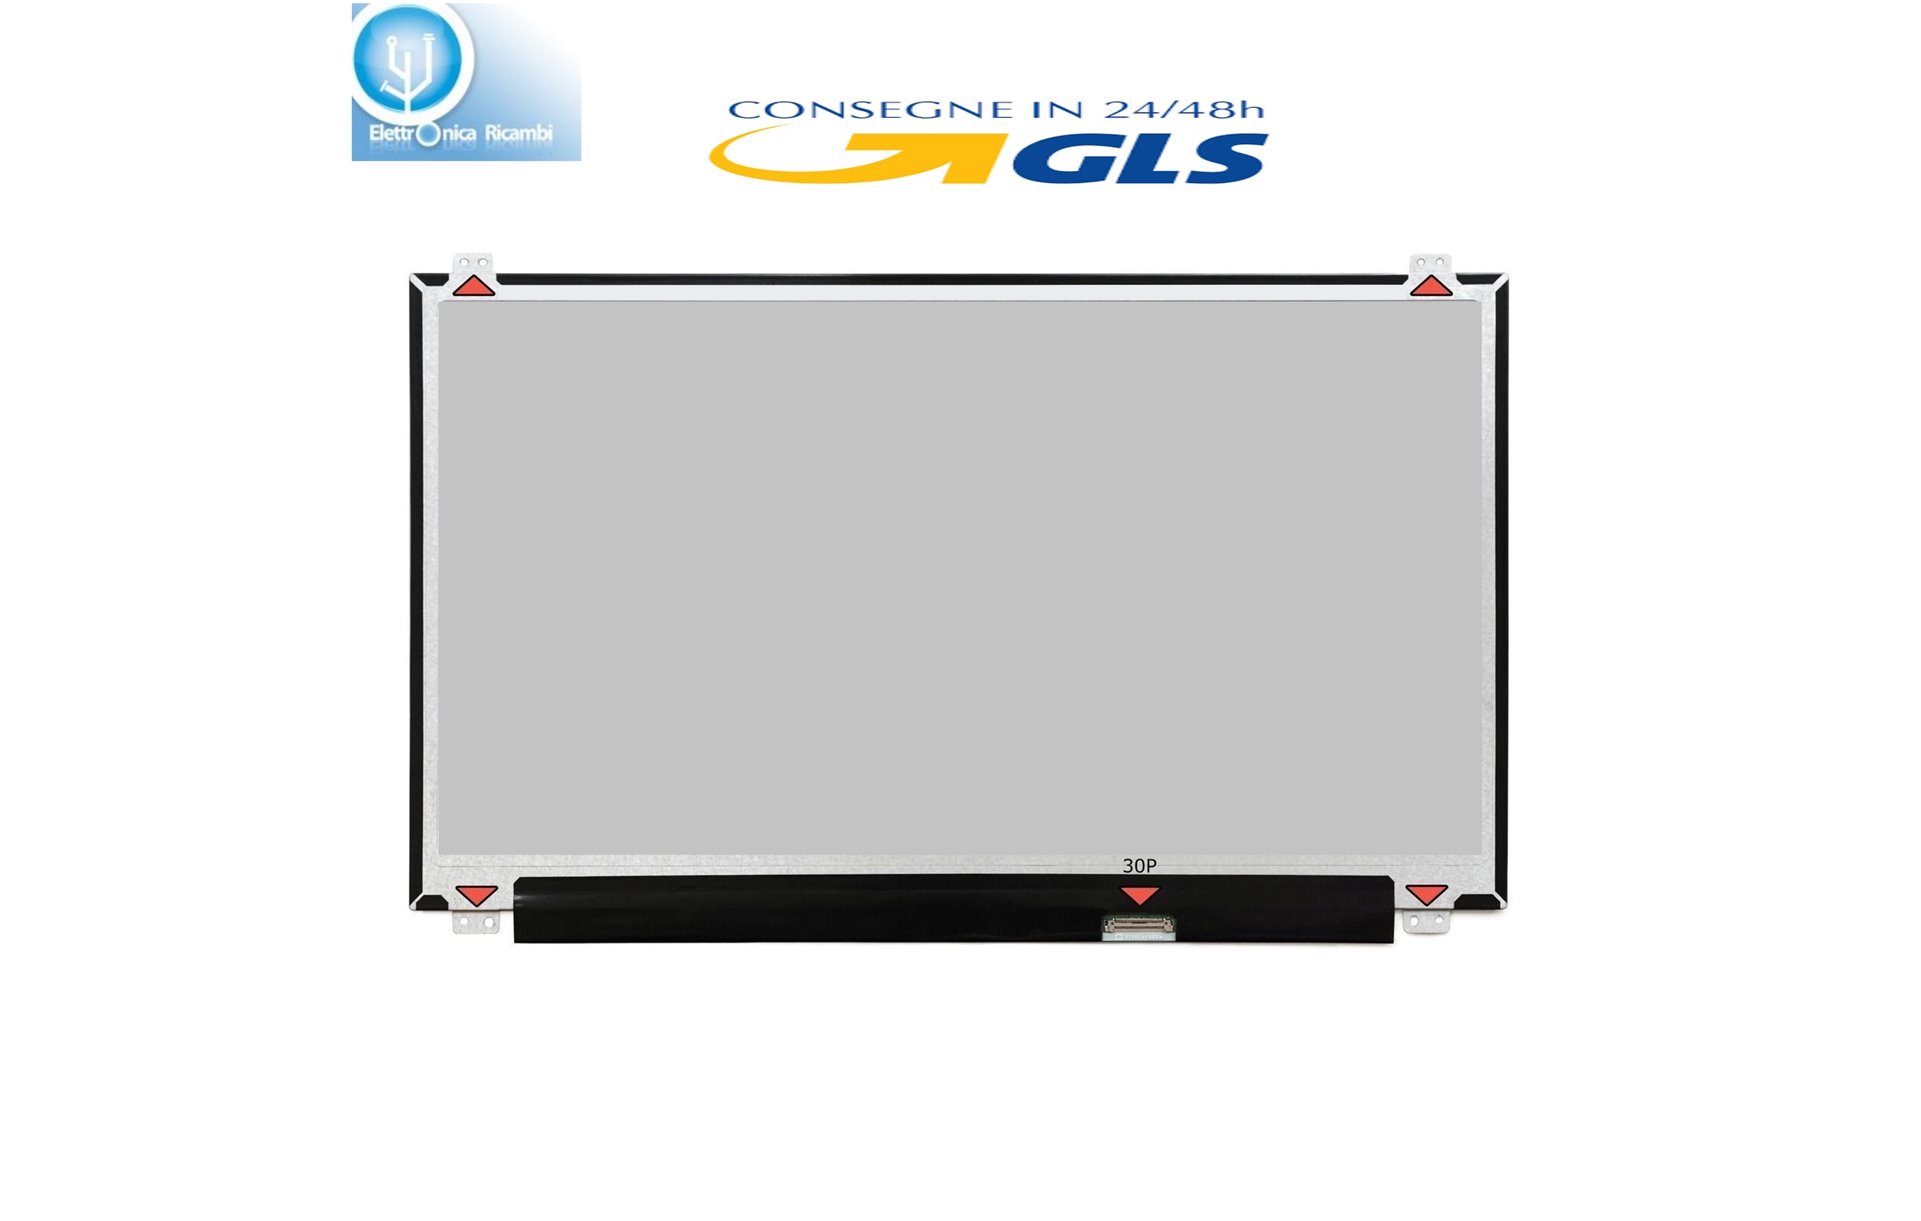 DISPLAY LCD PACKARDBELL EASYNOTE ENTG81BA-C04G 15.6 1366x768 LED 30 pin